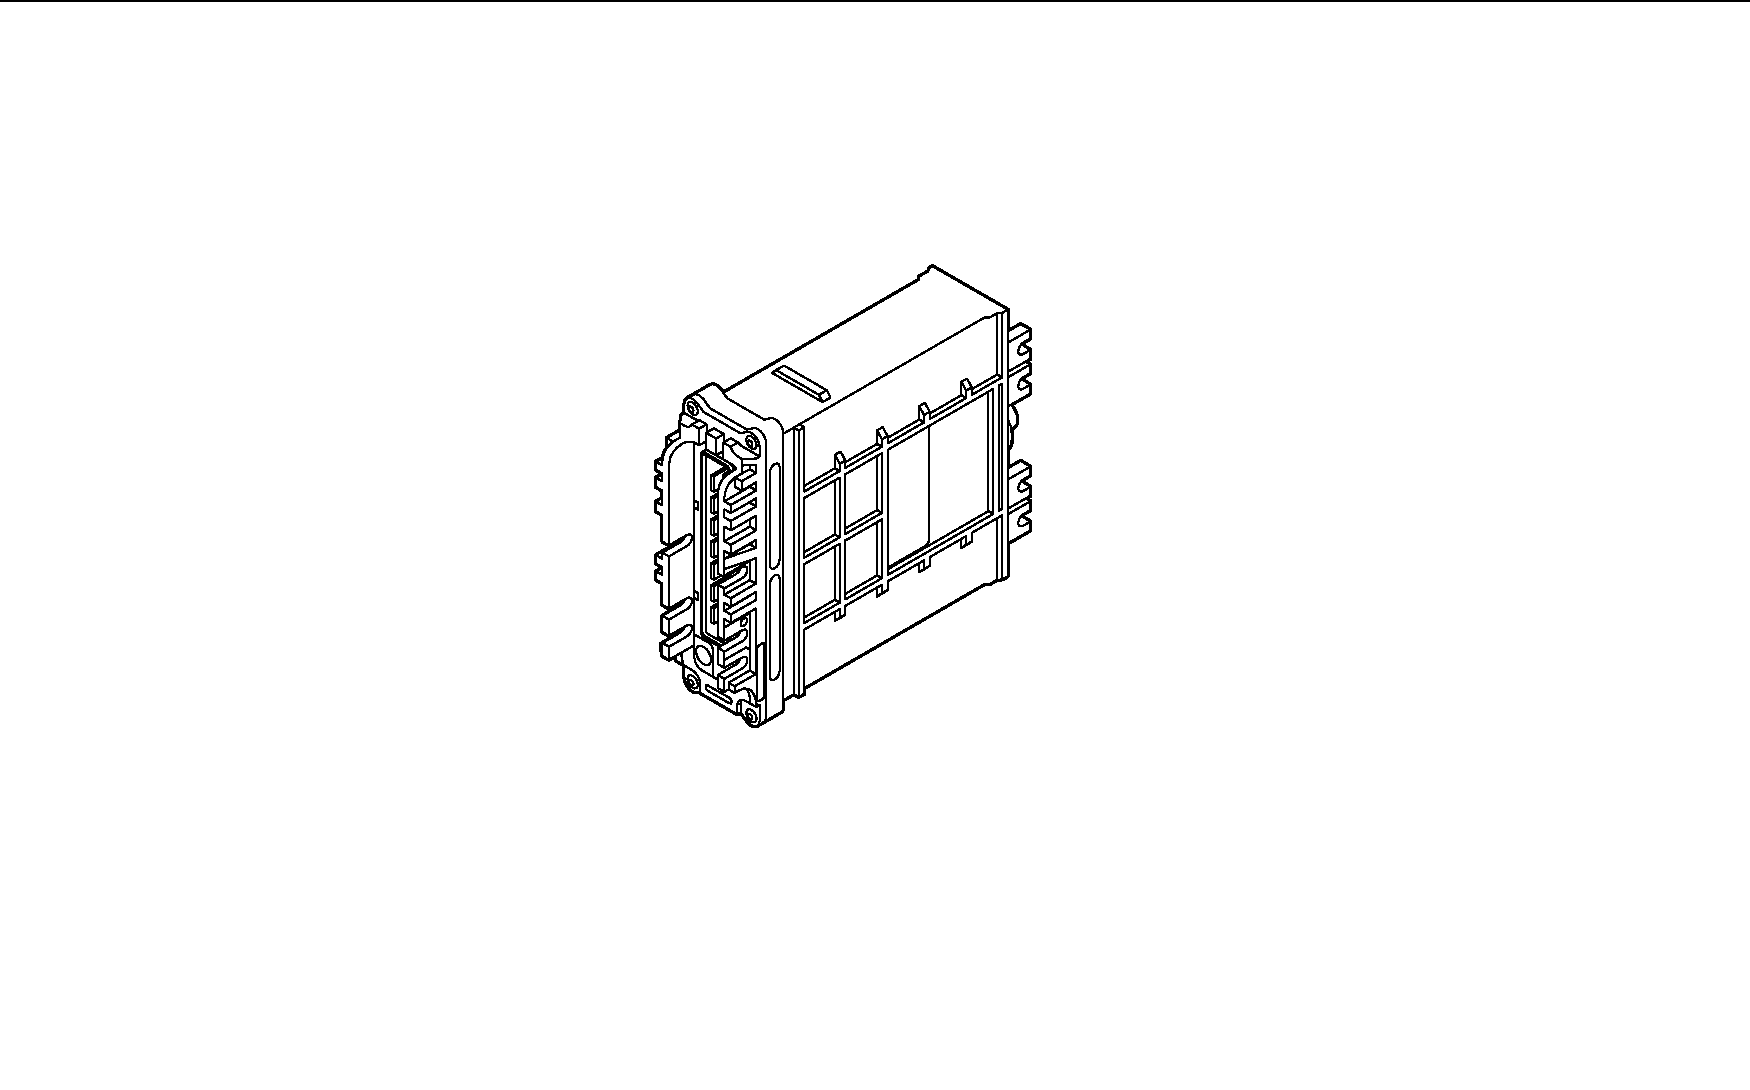 drawing for SCANIA 492857 - EST 46 C (figure 1)